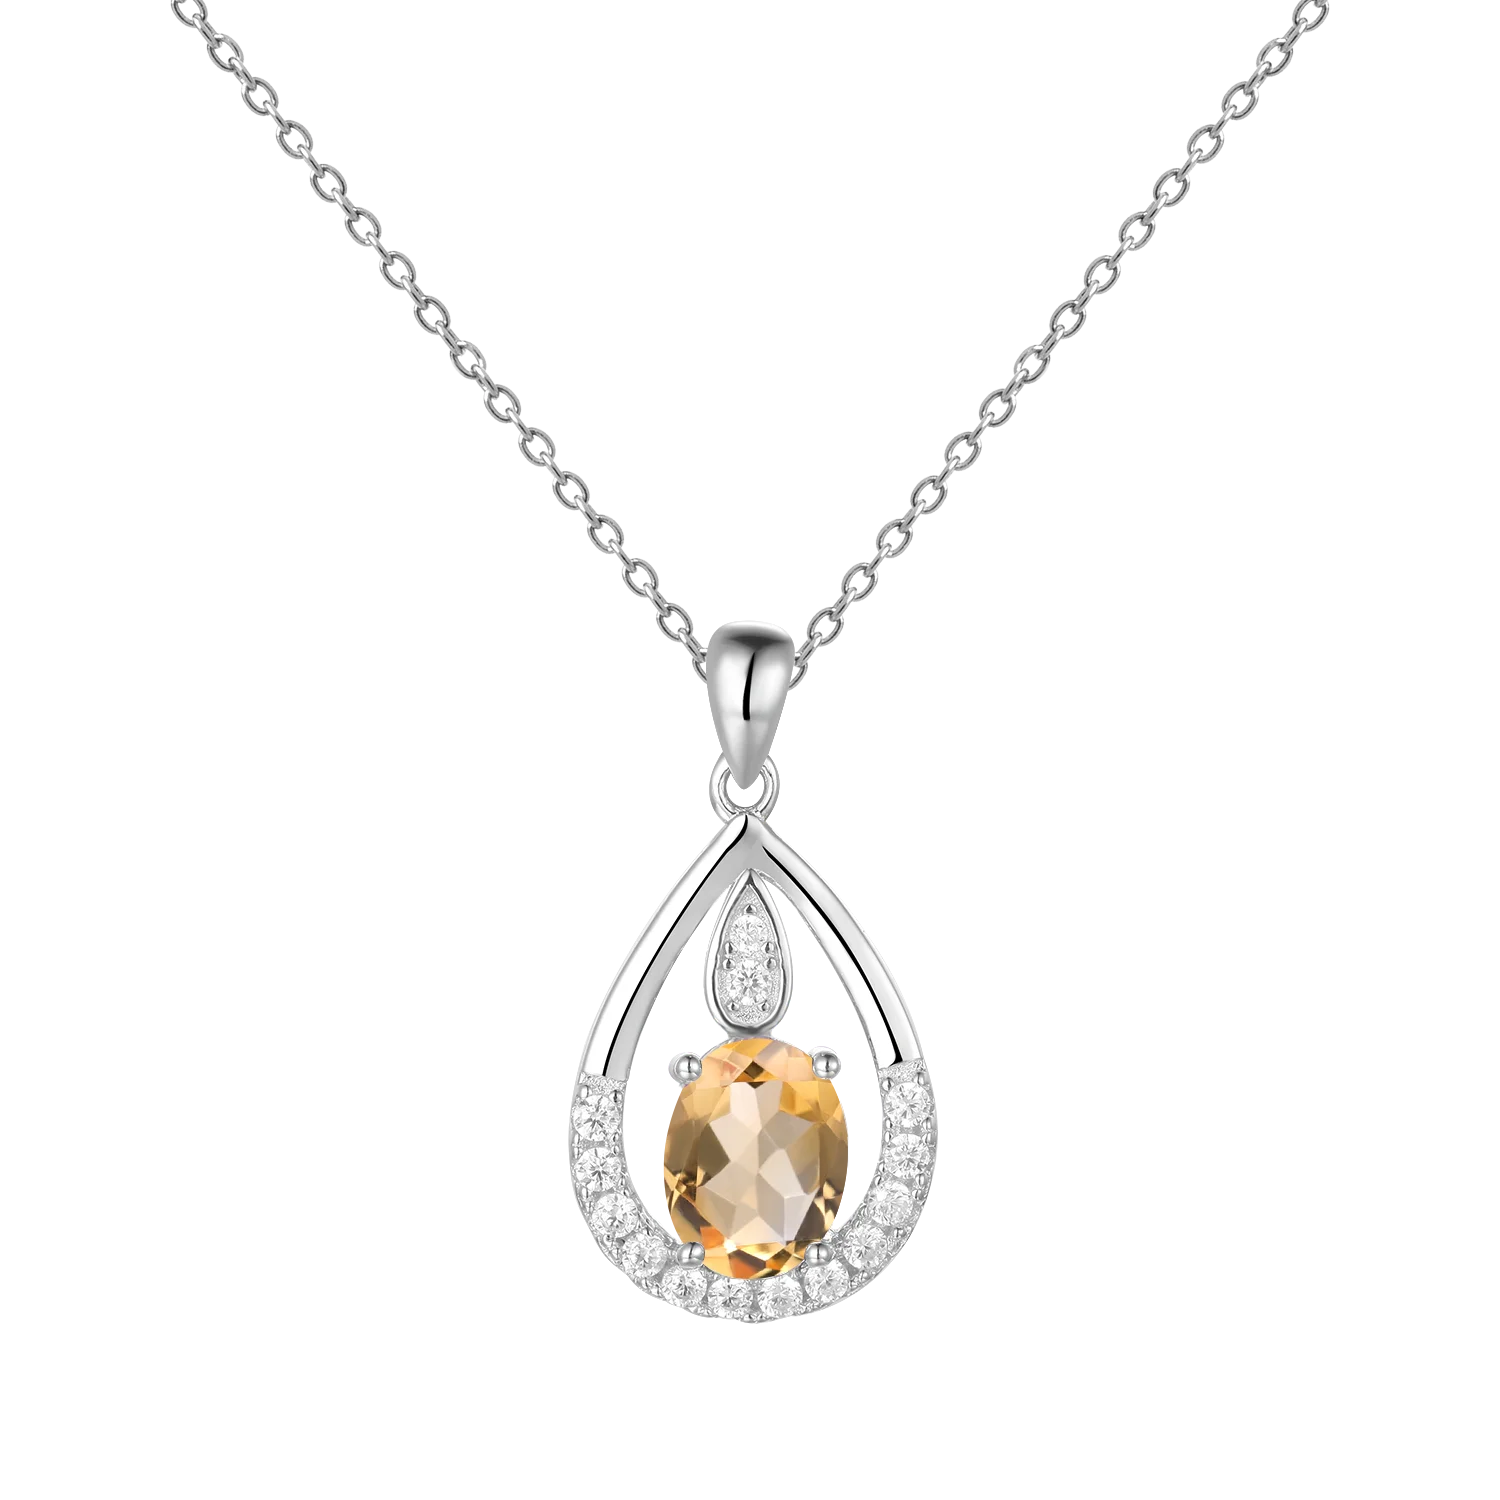 Gem's Ballet December Birthstone Topaz Necklace 6x8mm Oval Pink Topaz Pendant Necklace in 925 Sterling Silver with 18" Chain Citrine